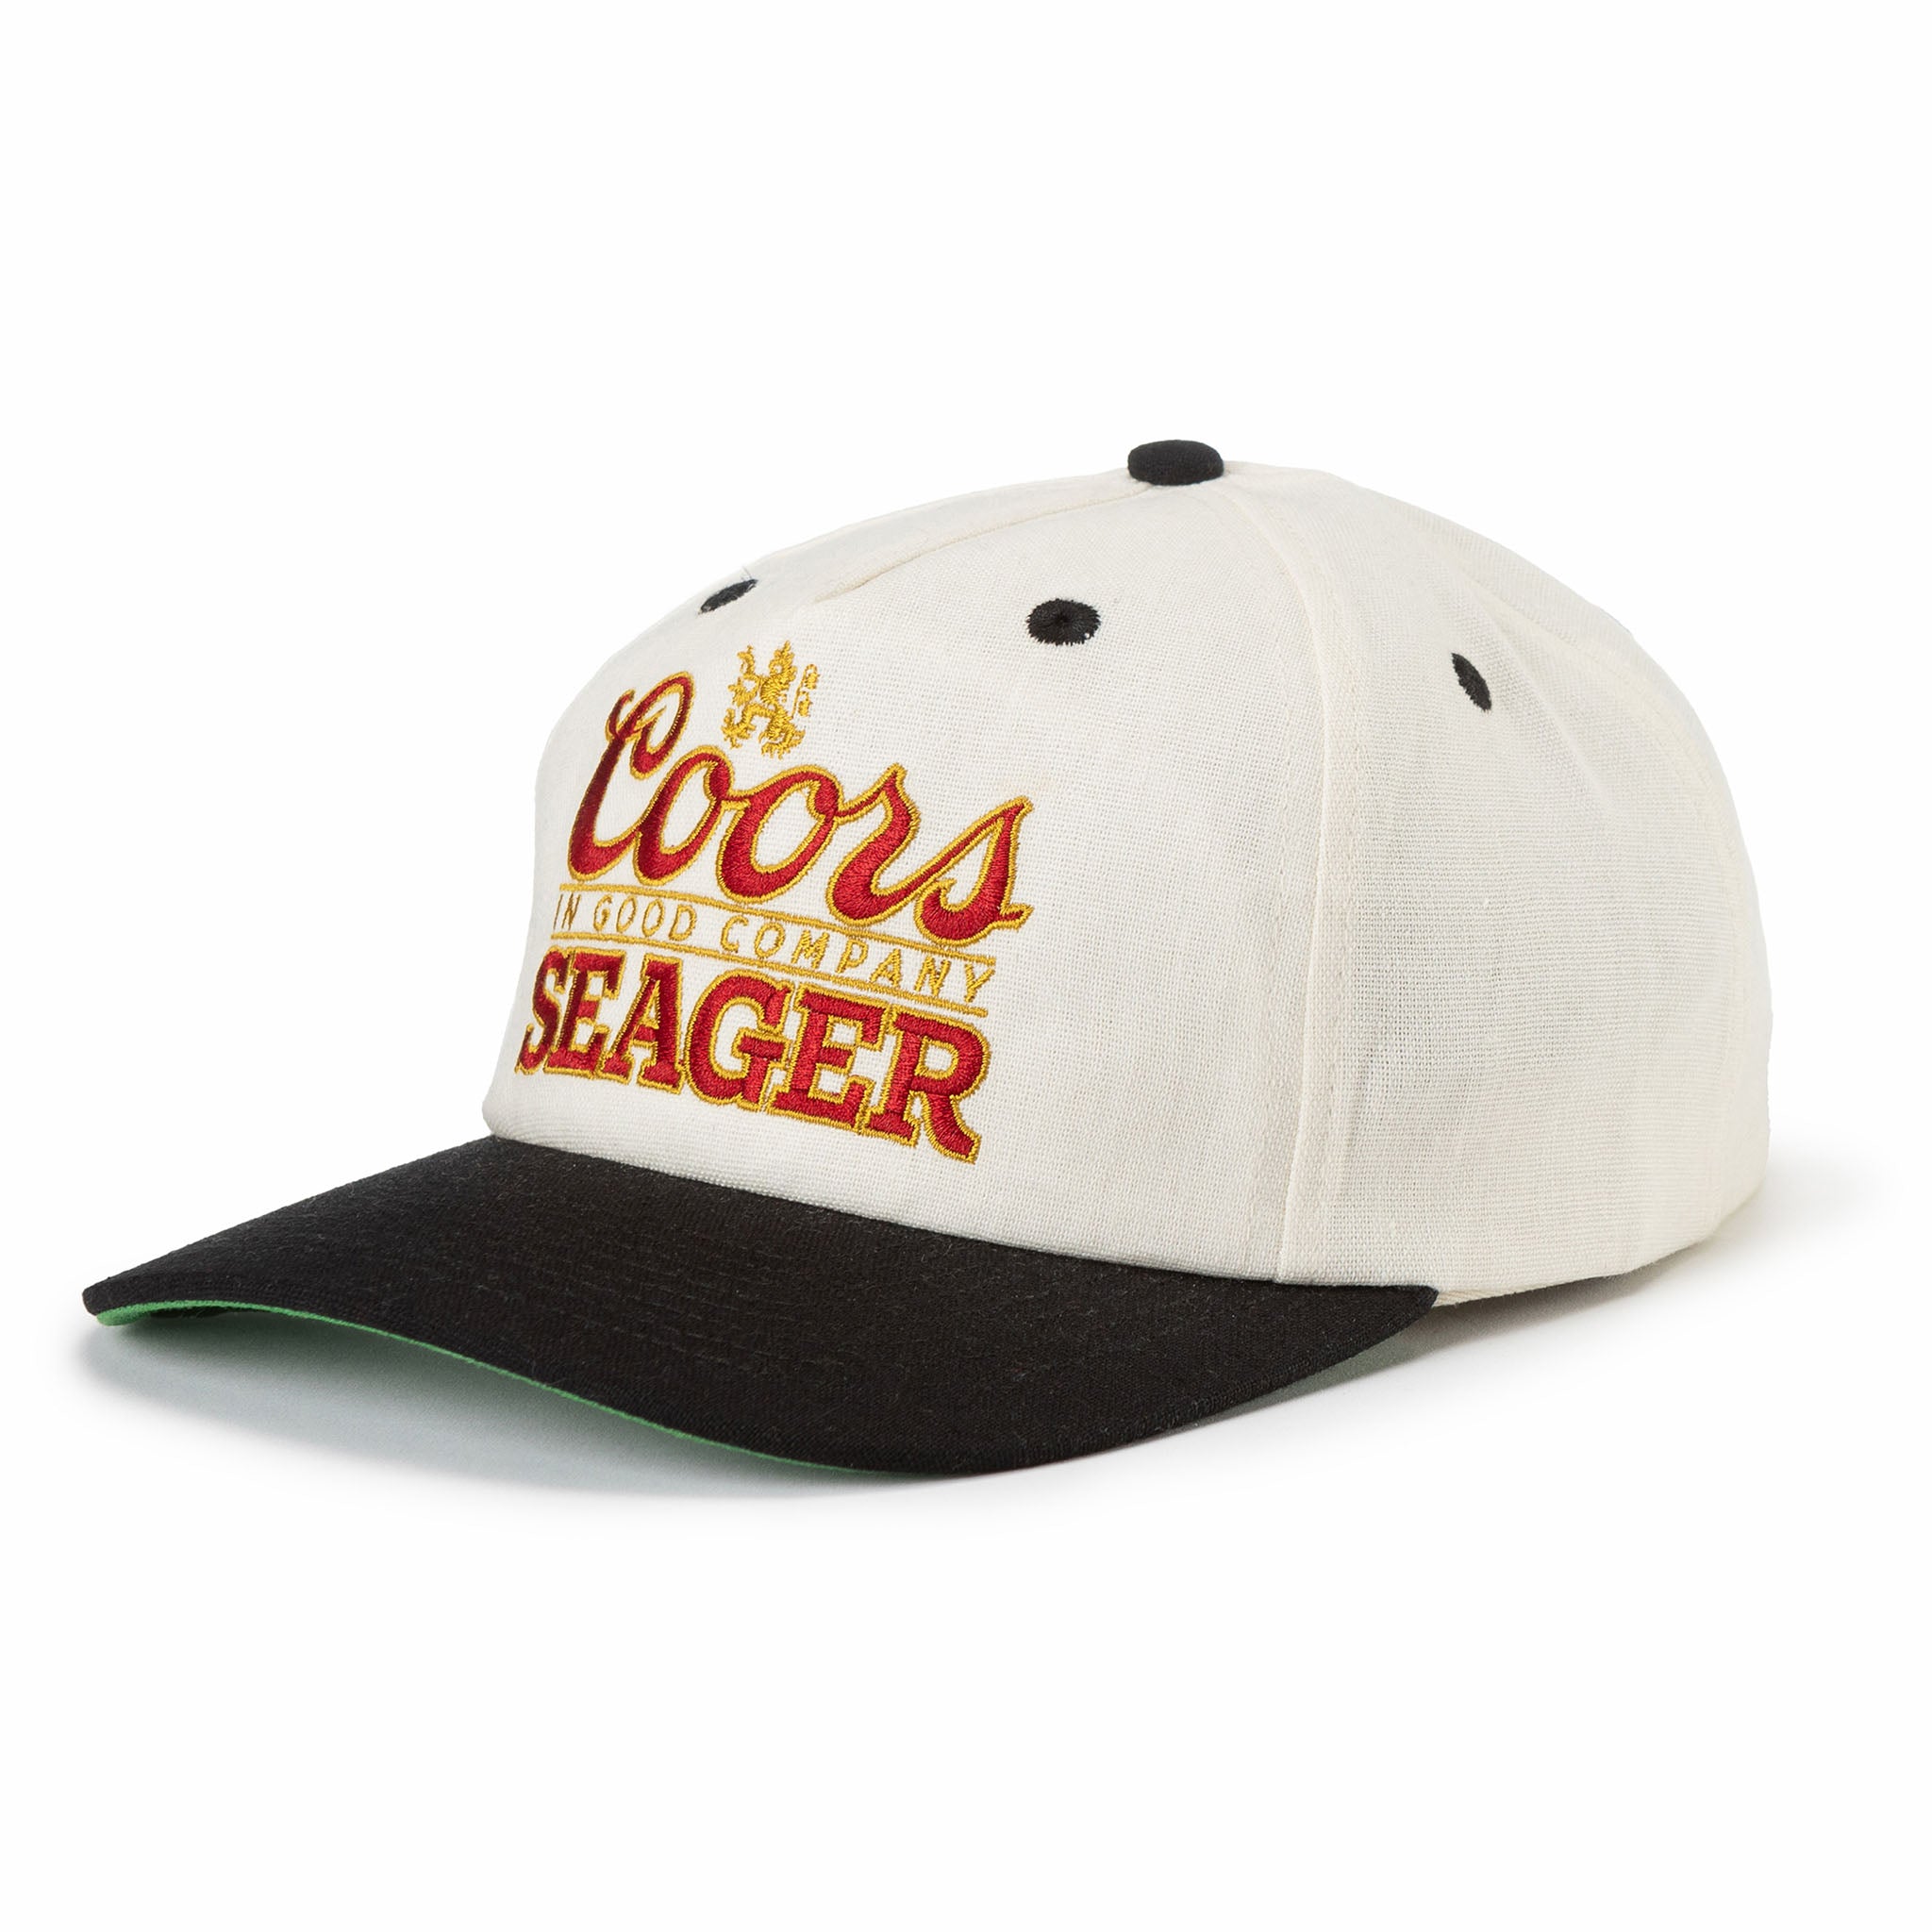 Seager x Coors Banquet Longhorn 4X Hat Black